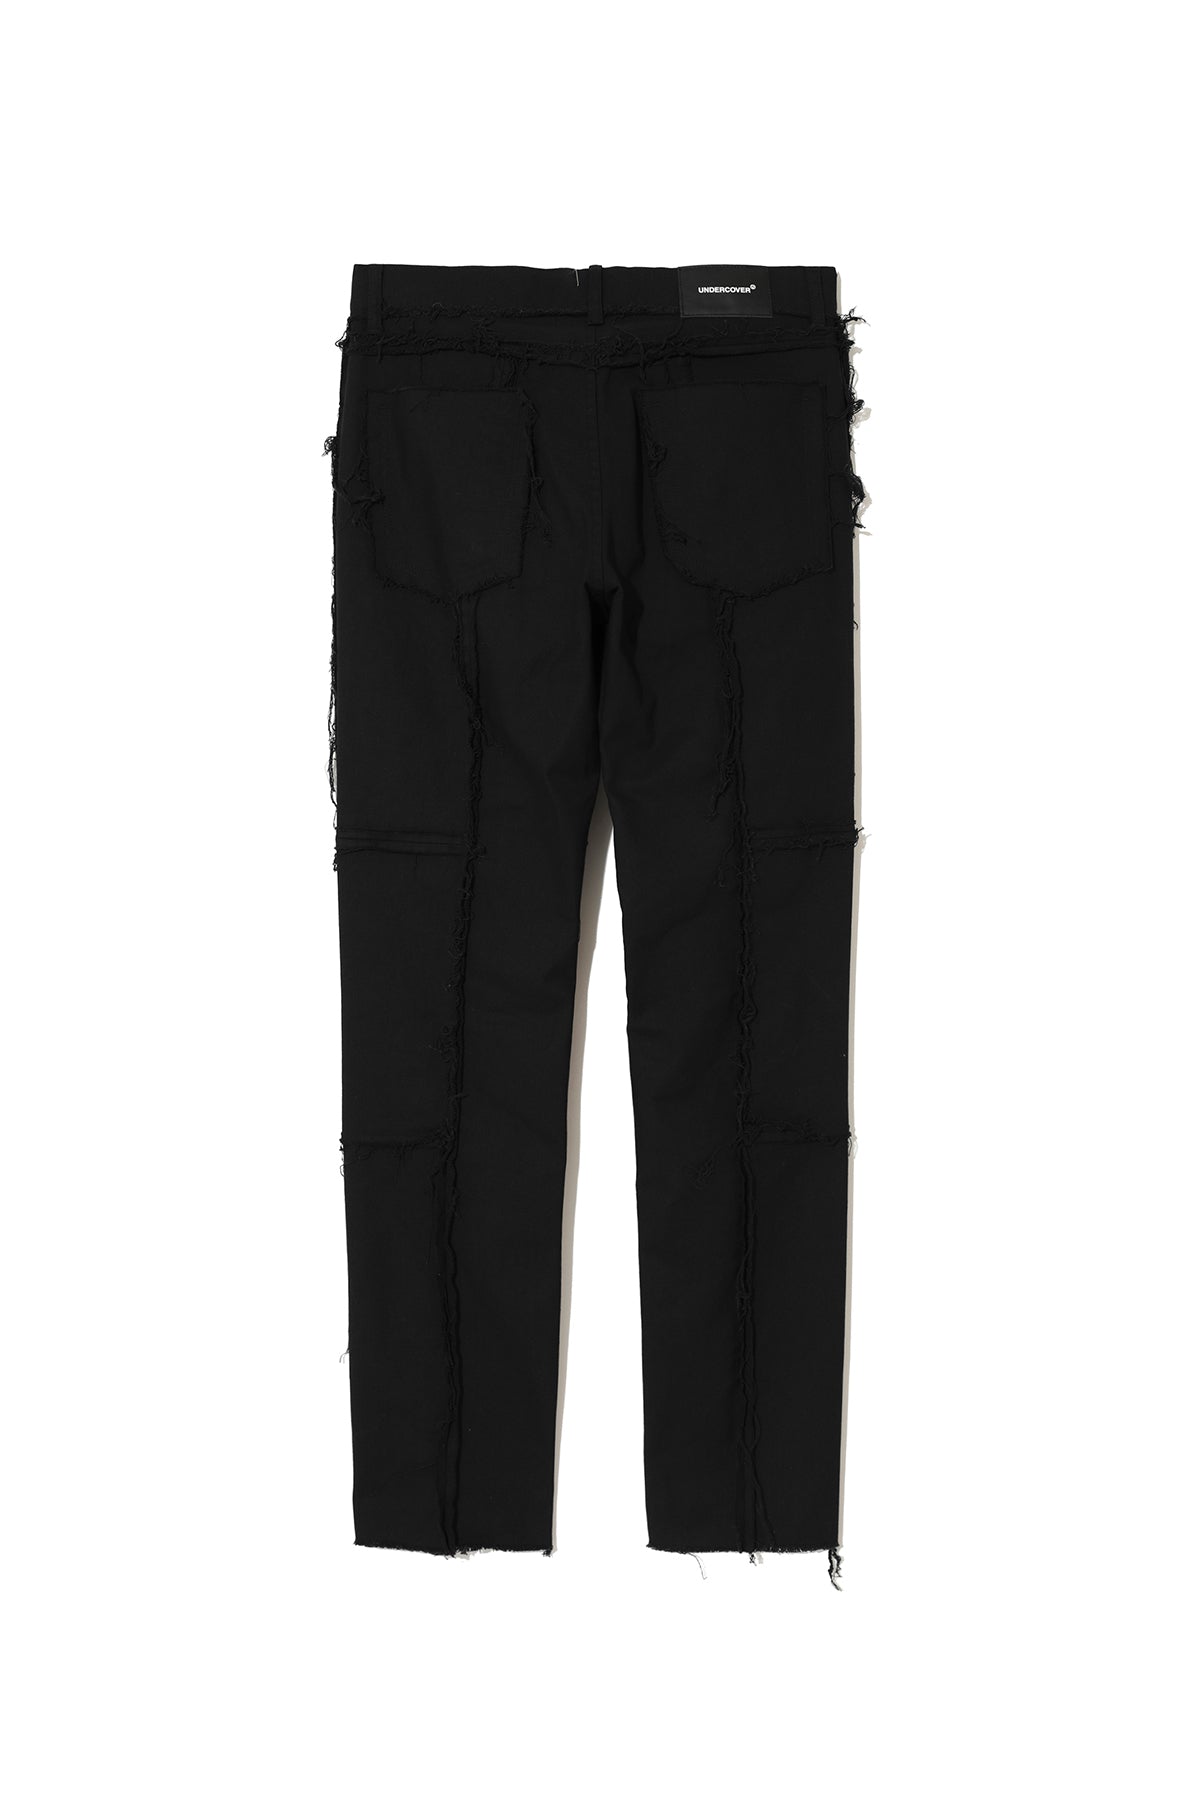 UNDERCOVER Black Paneled Trousers